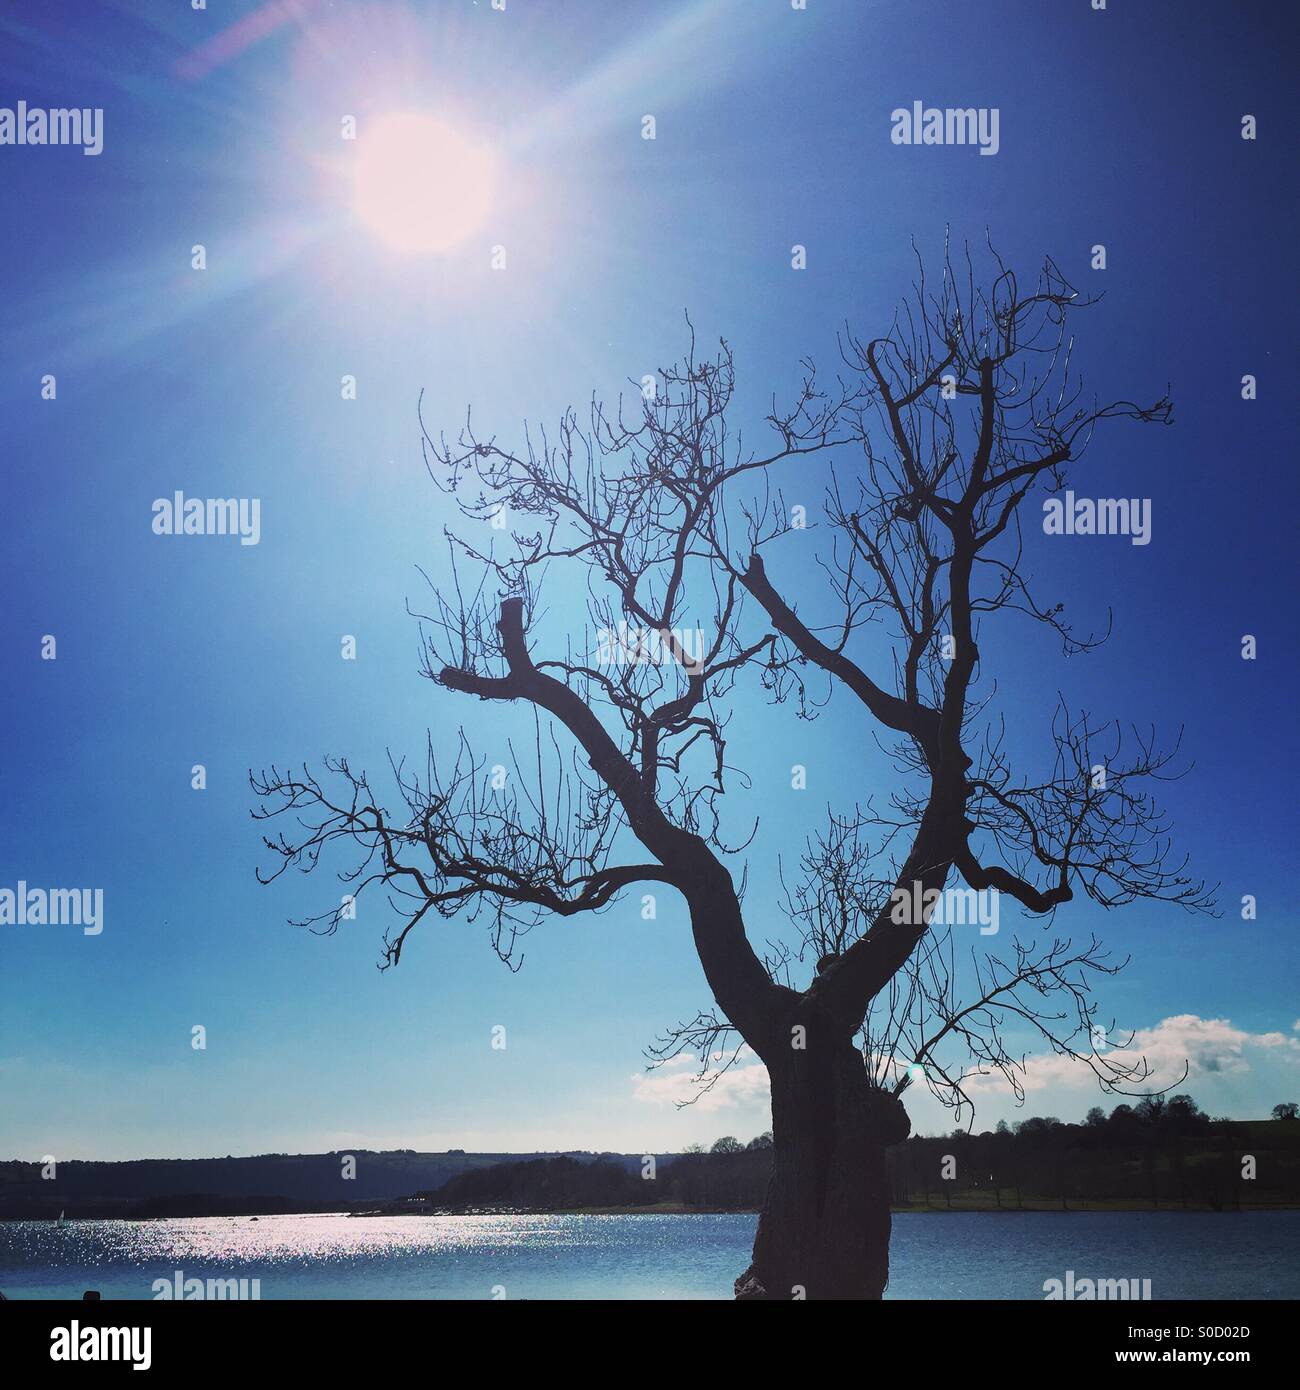 A tree in the sun over a lake Stock Photo